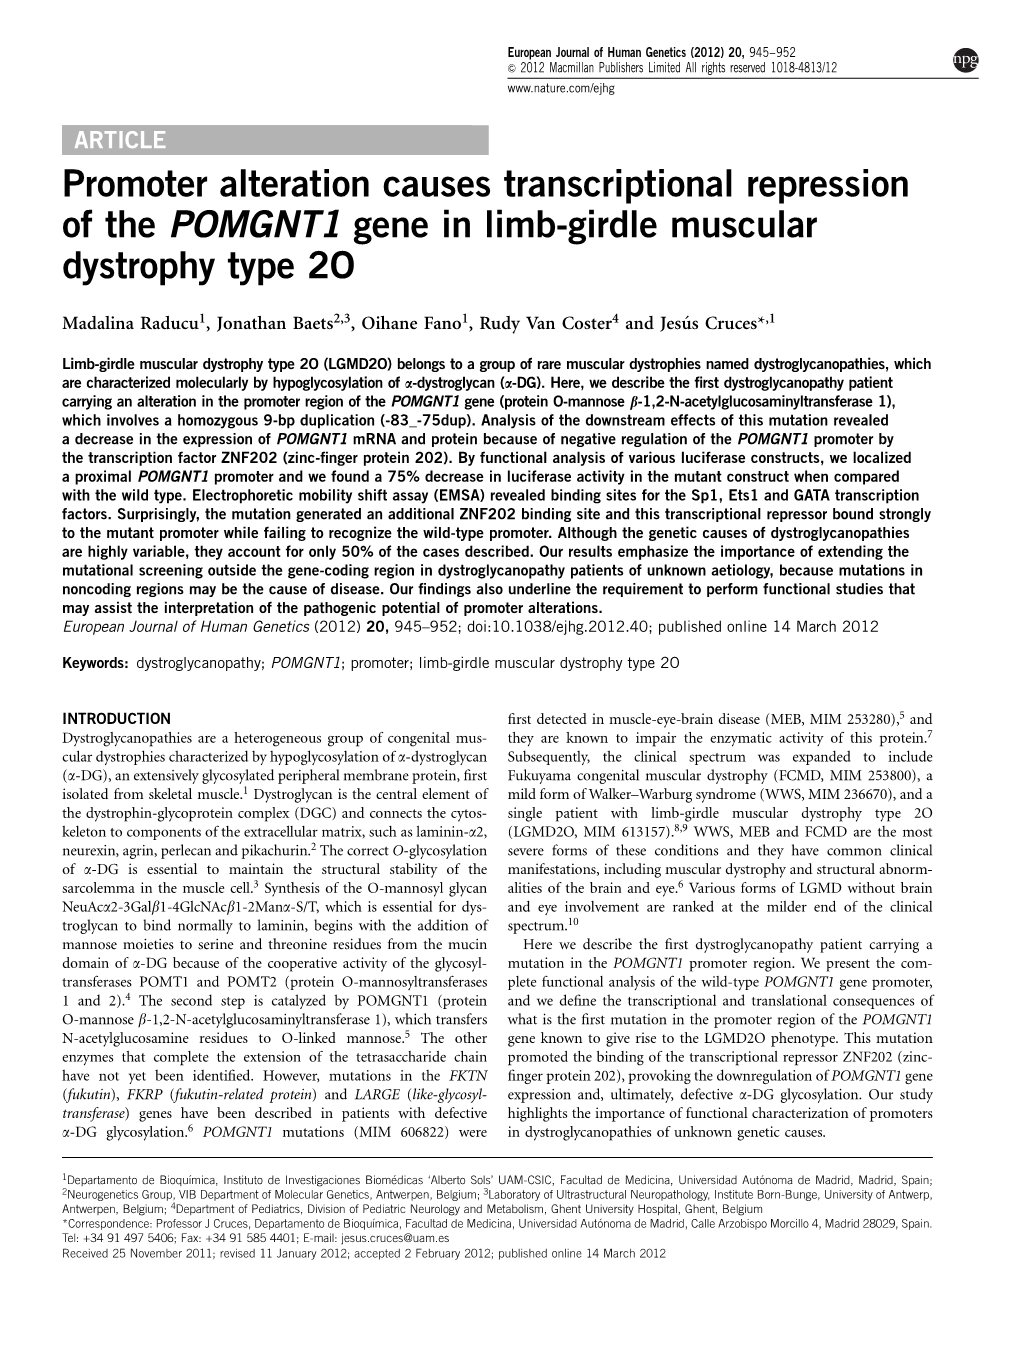 Promoter Alteration Causes Transcriptional Repression of the POMGNT1 Gene in Limb-Girdle Muscular Dystrophy Type 2O